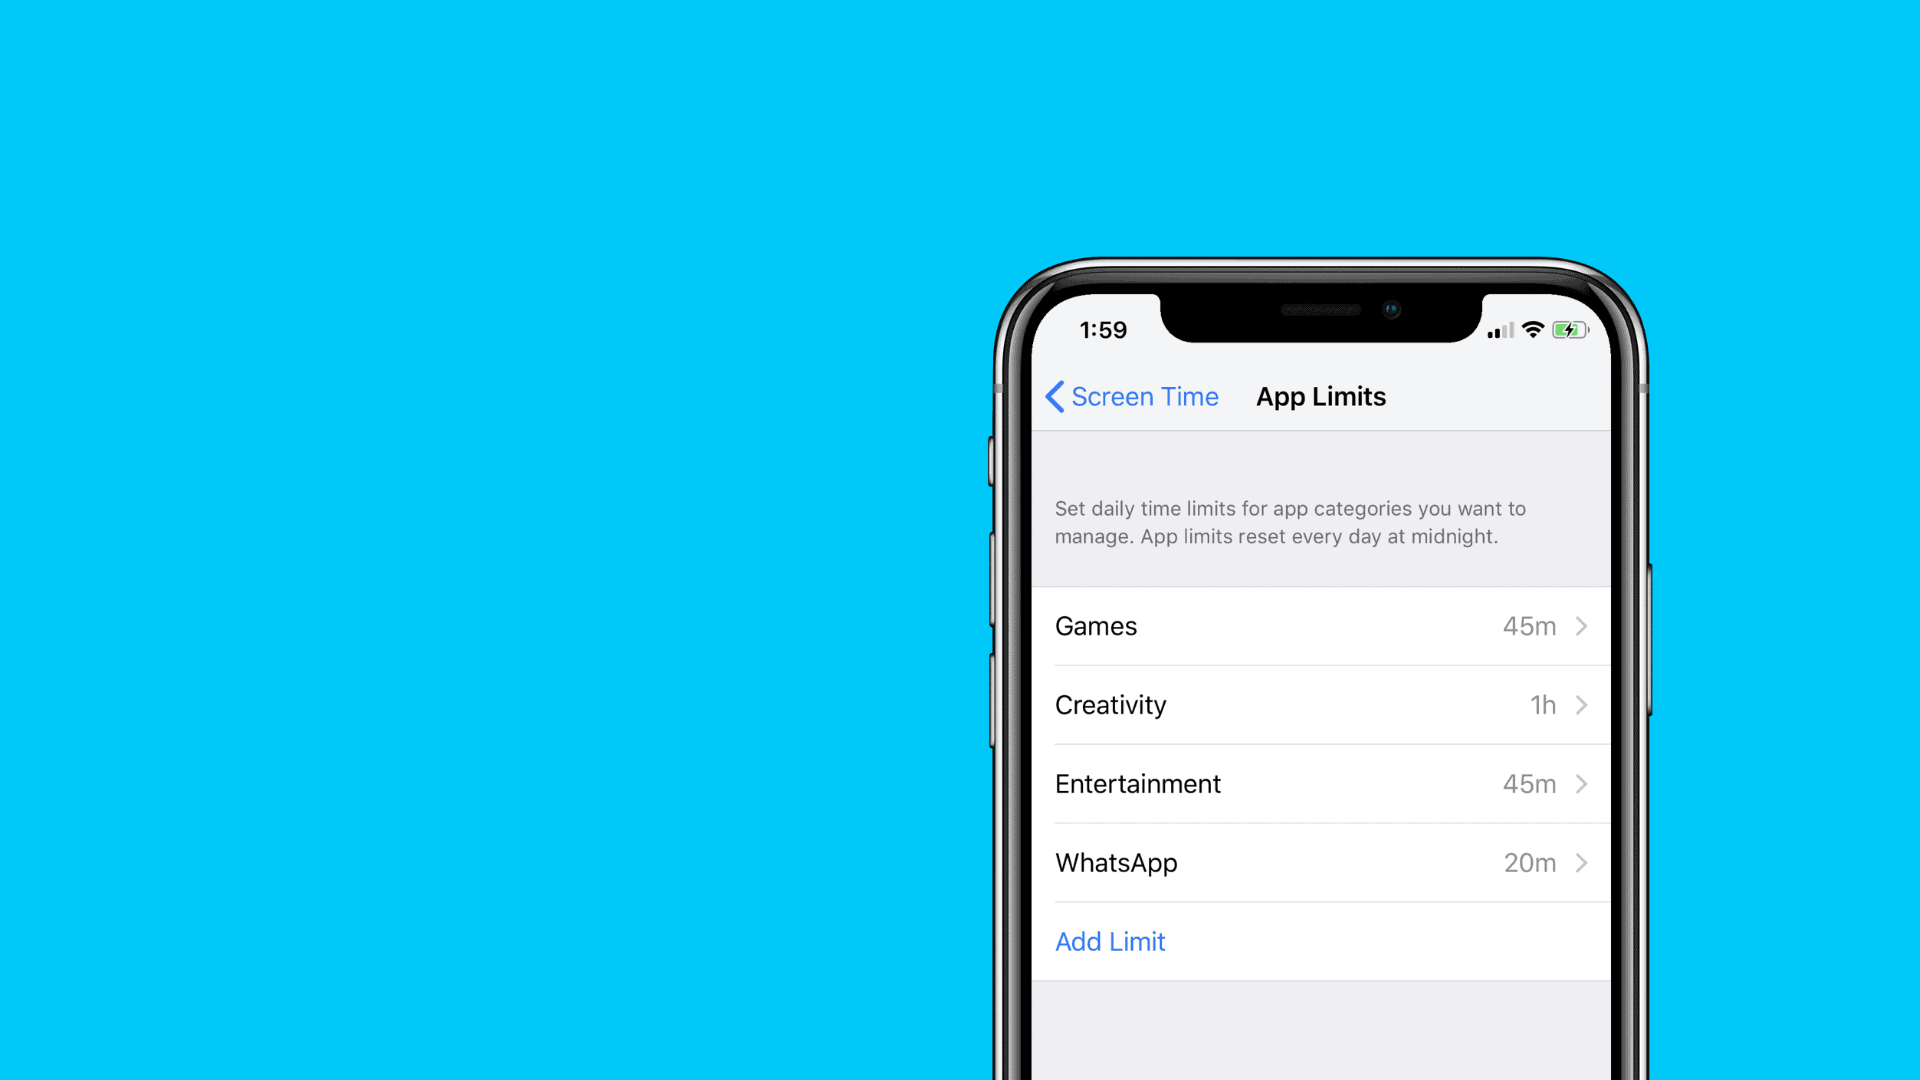 How to set App limits on iOS 12